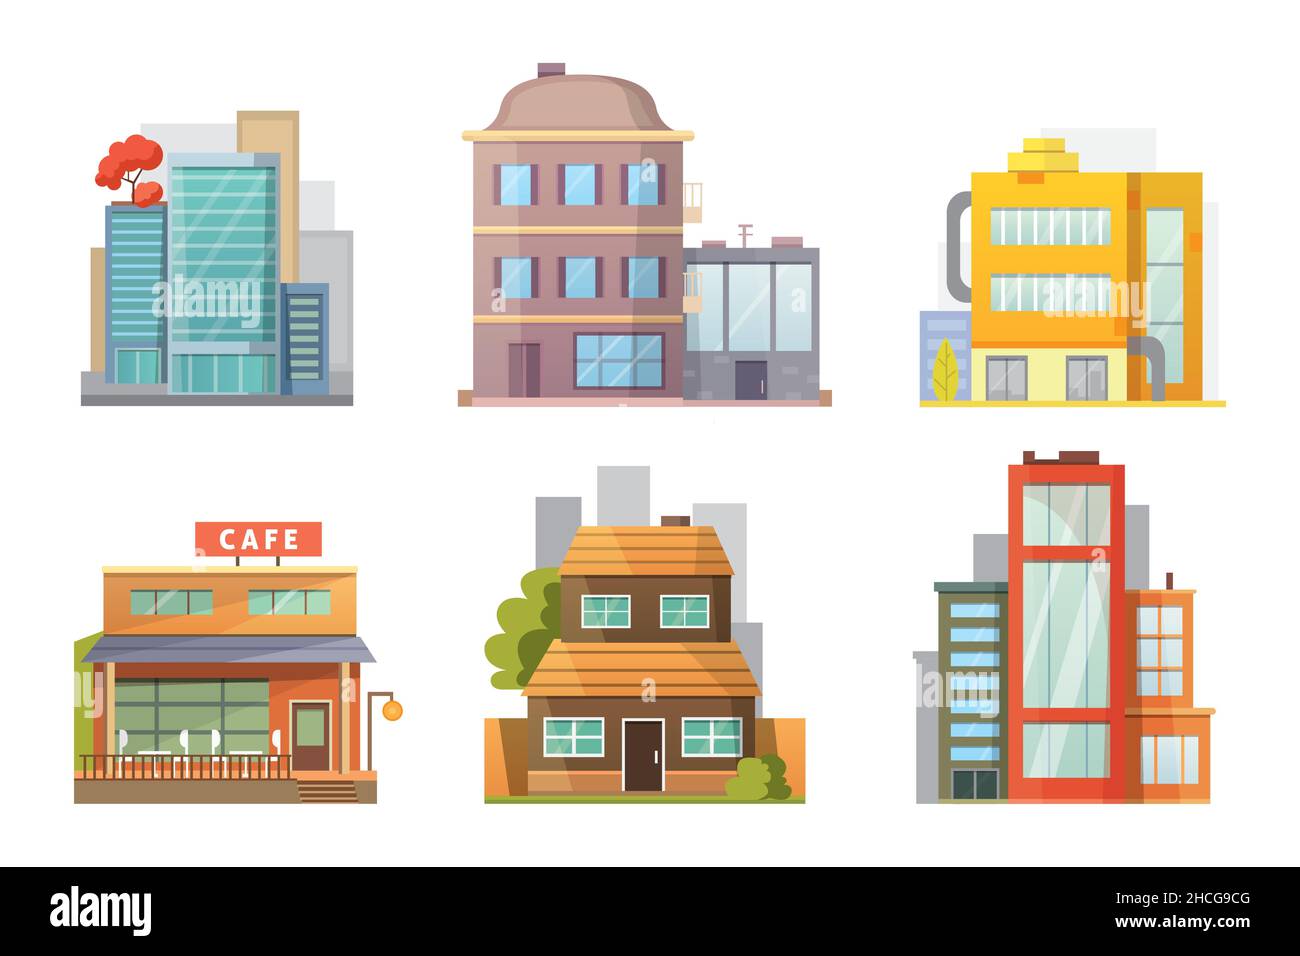 Set of city building and infrastructure. Home and public space environment. Colorful flat vector illustration isolated on white background Stock Vector